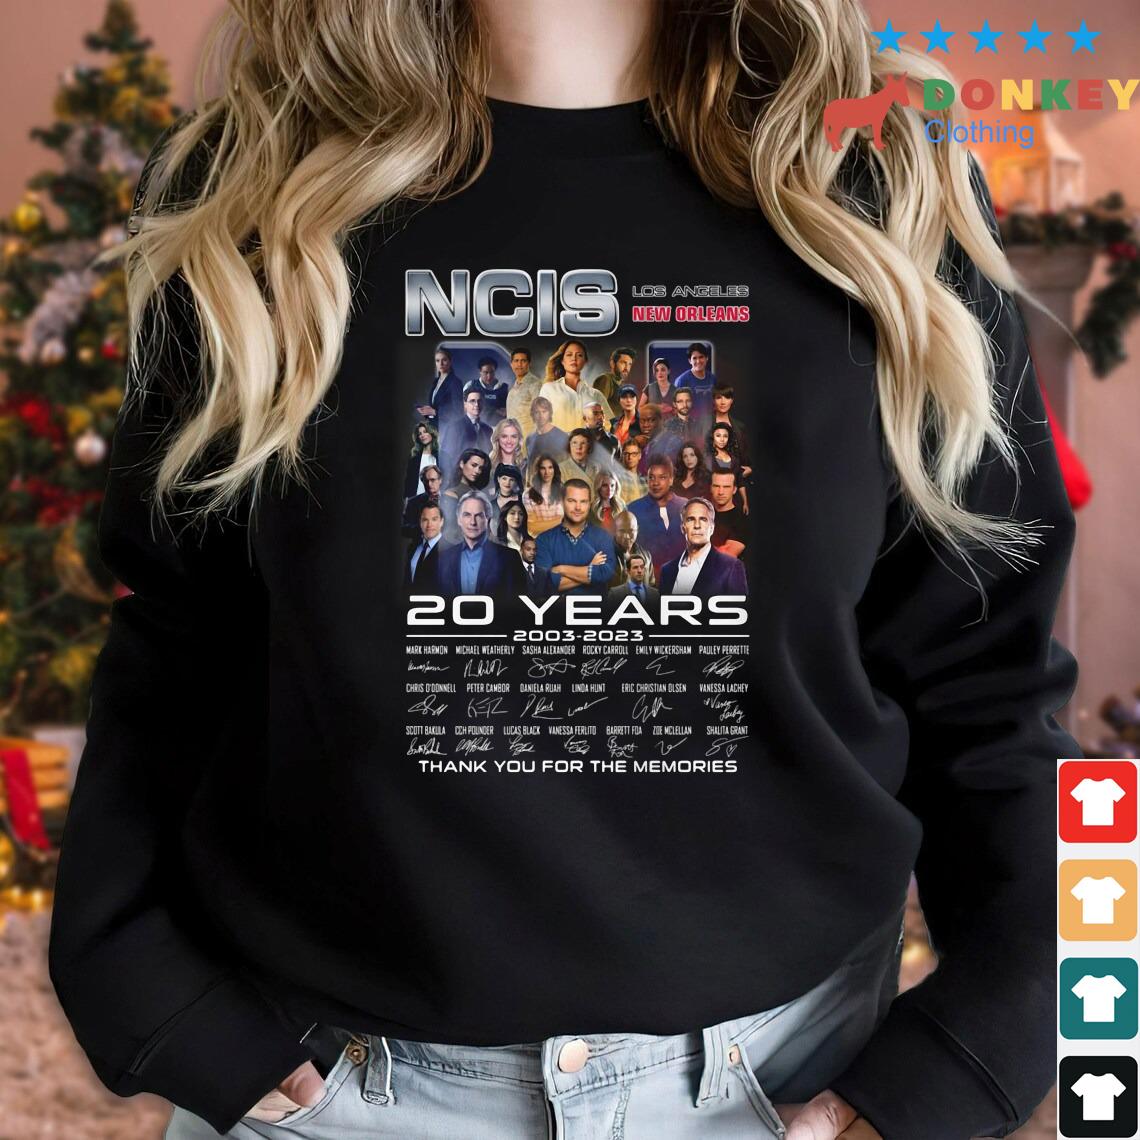 NCIS Los Angeles New Orleans 20 Years 2003 2023 Signatures Thank You Shirt